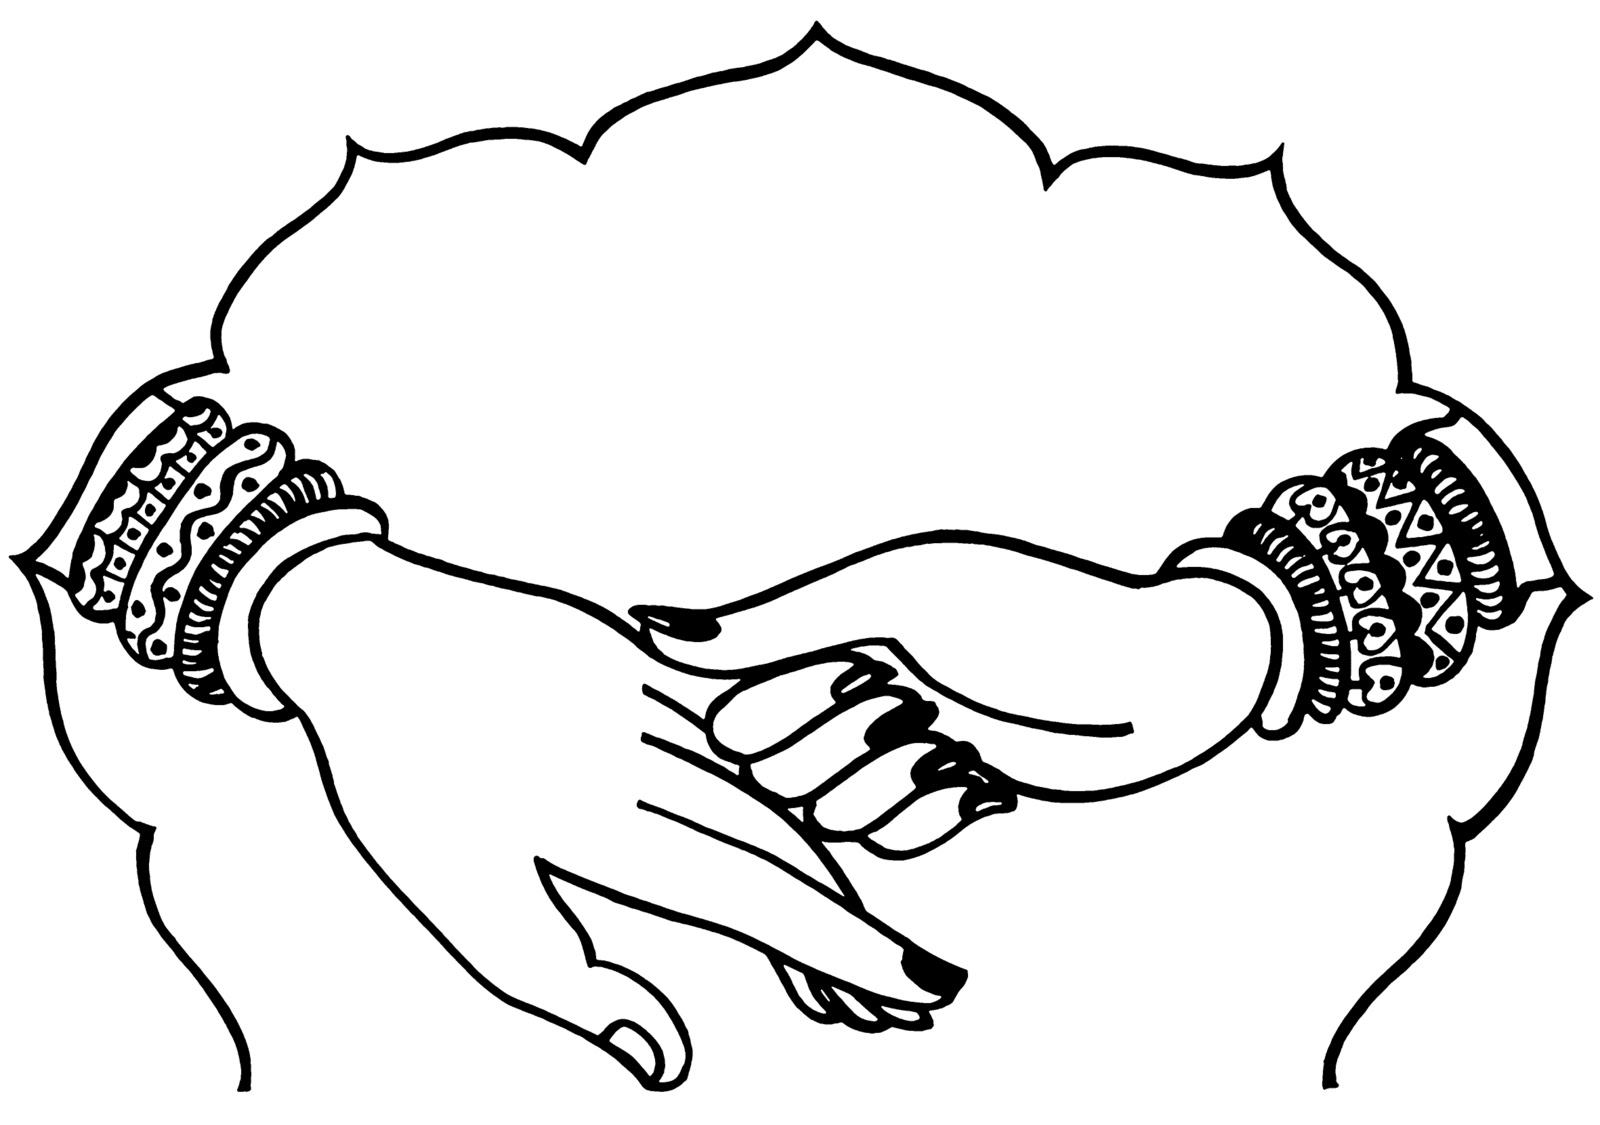 marriage clipart wedding hand